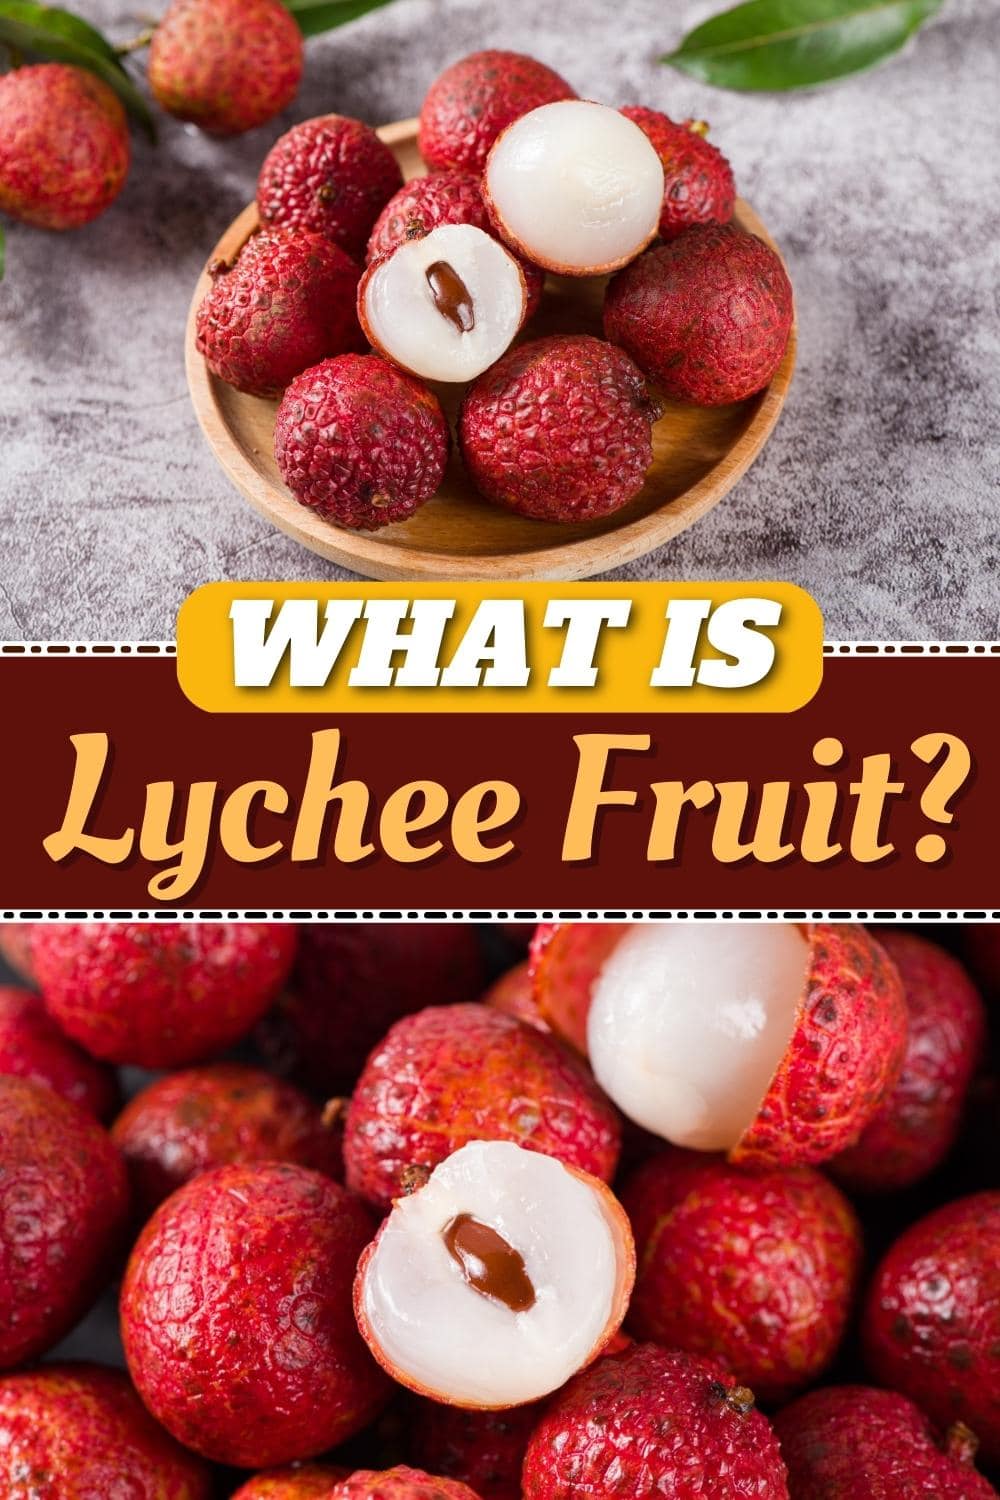 What Is Lychee Fruit?